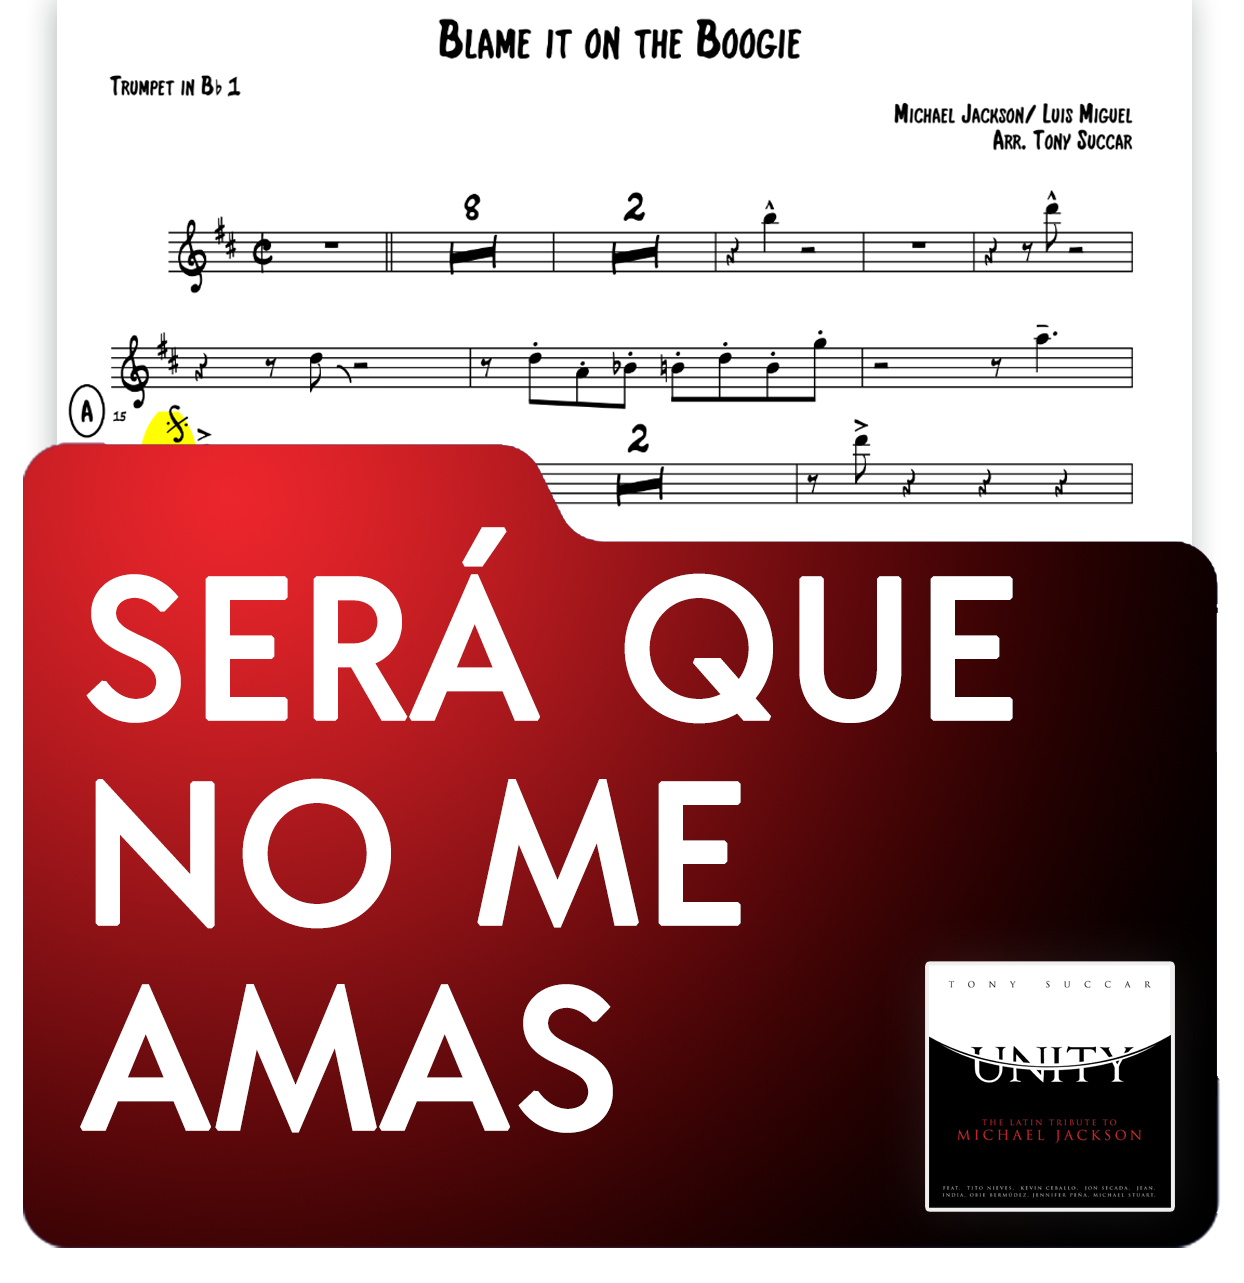 Sheet Music: Sera Que No Me Amas (Blame it on the Boogie)